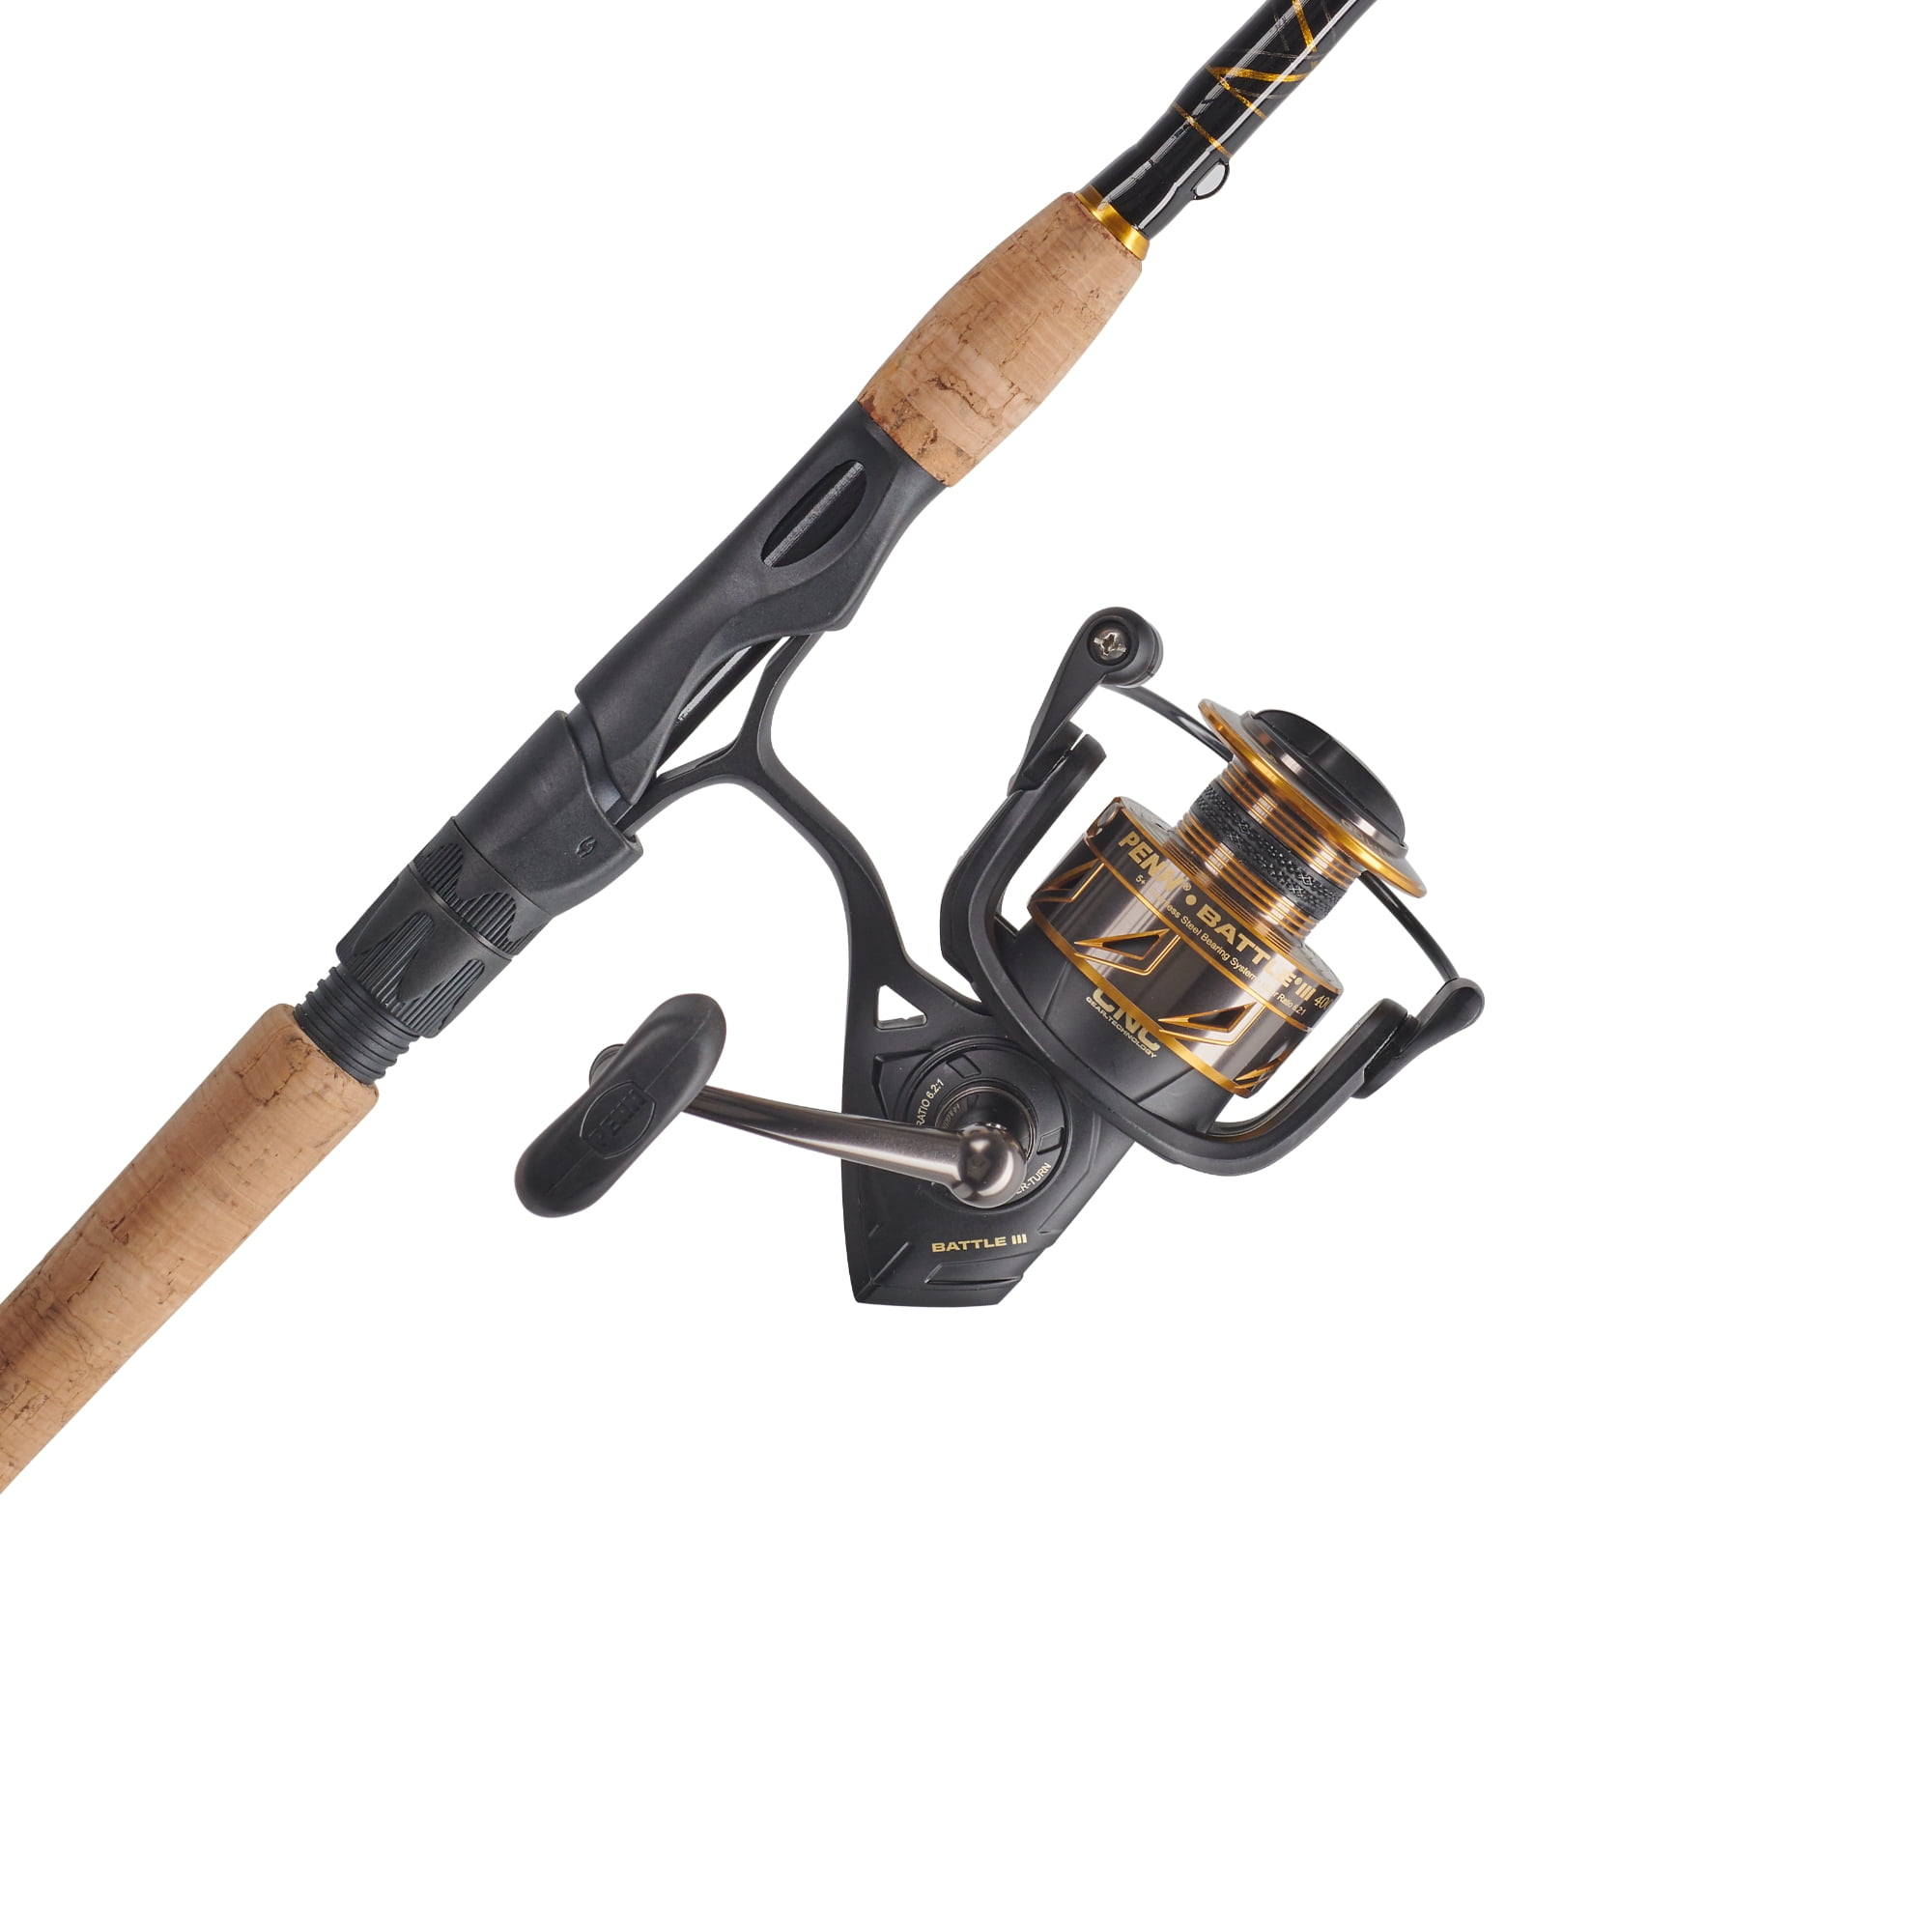 Top 7 Best Pen Fishing Rods for Portable Fishing